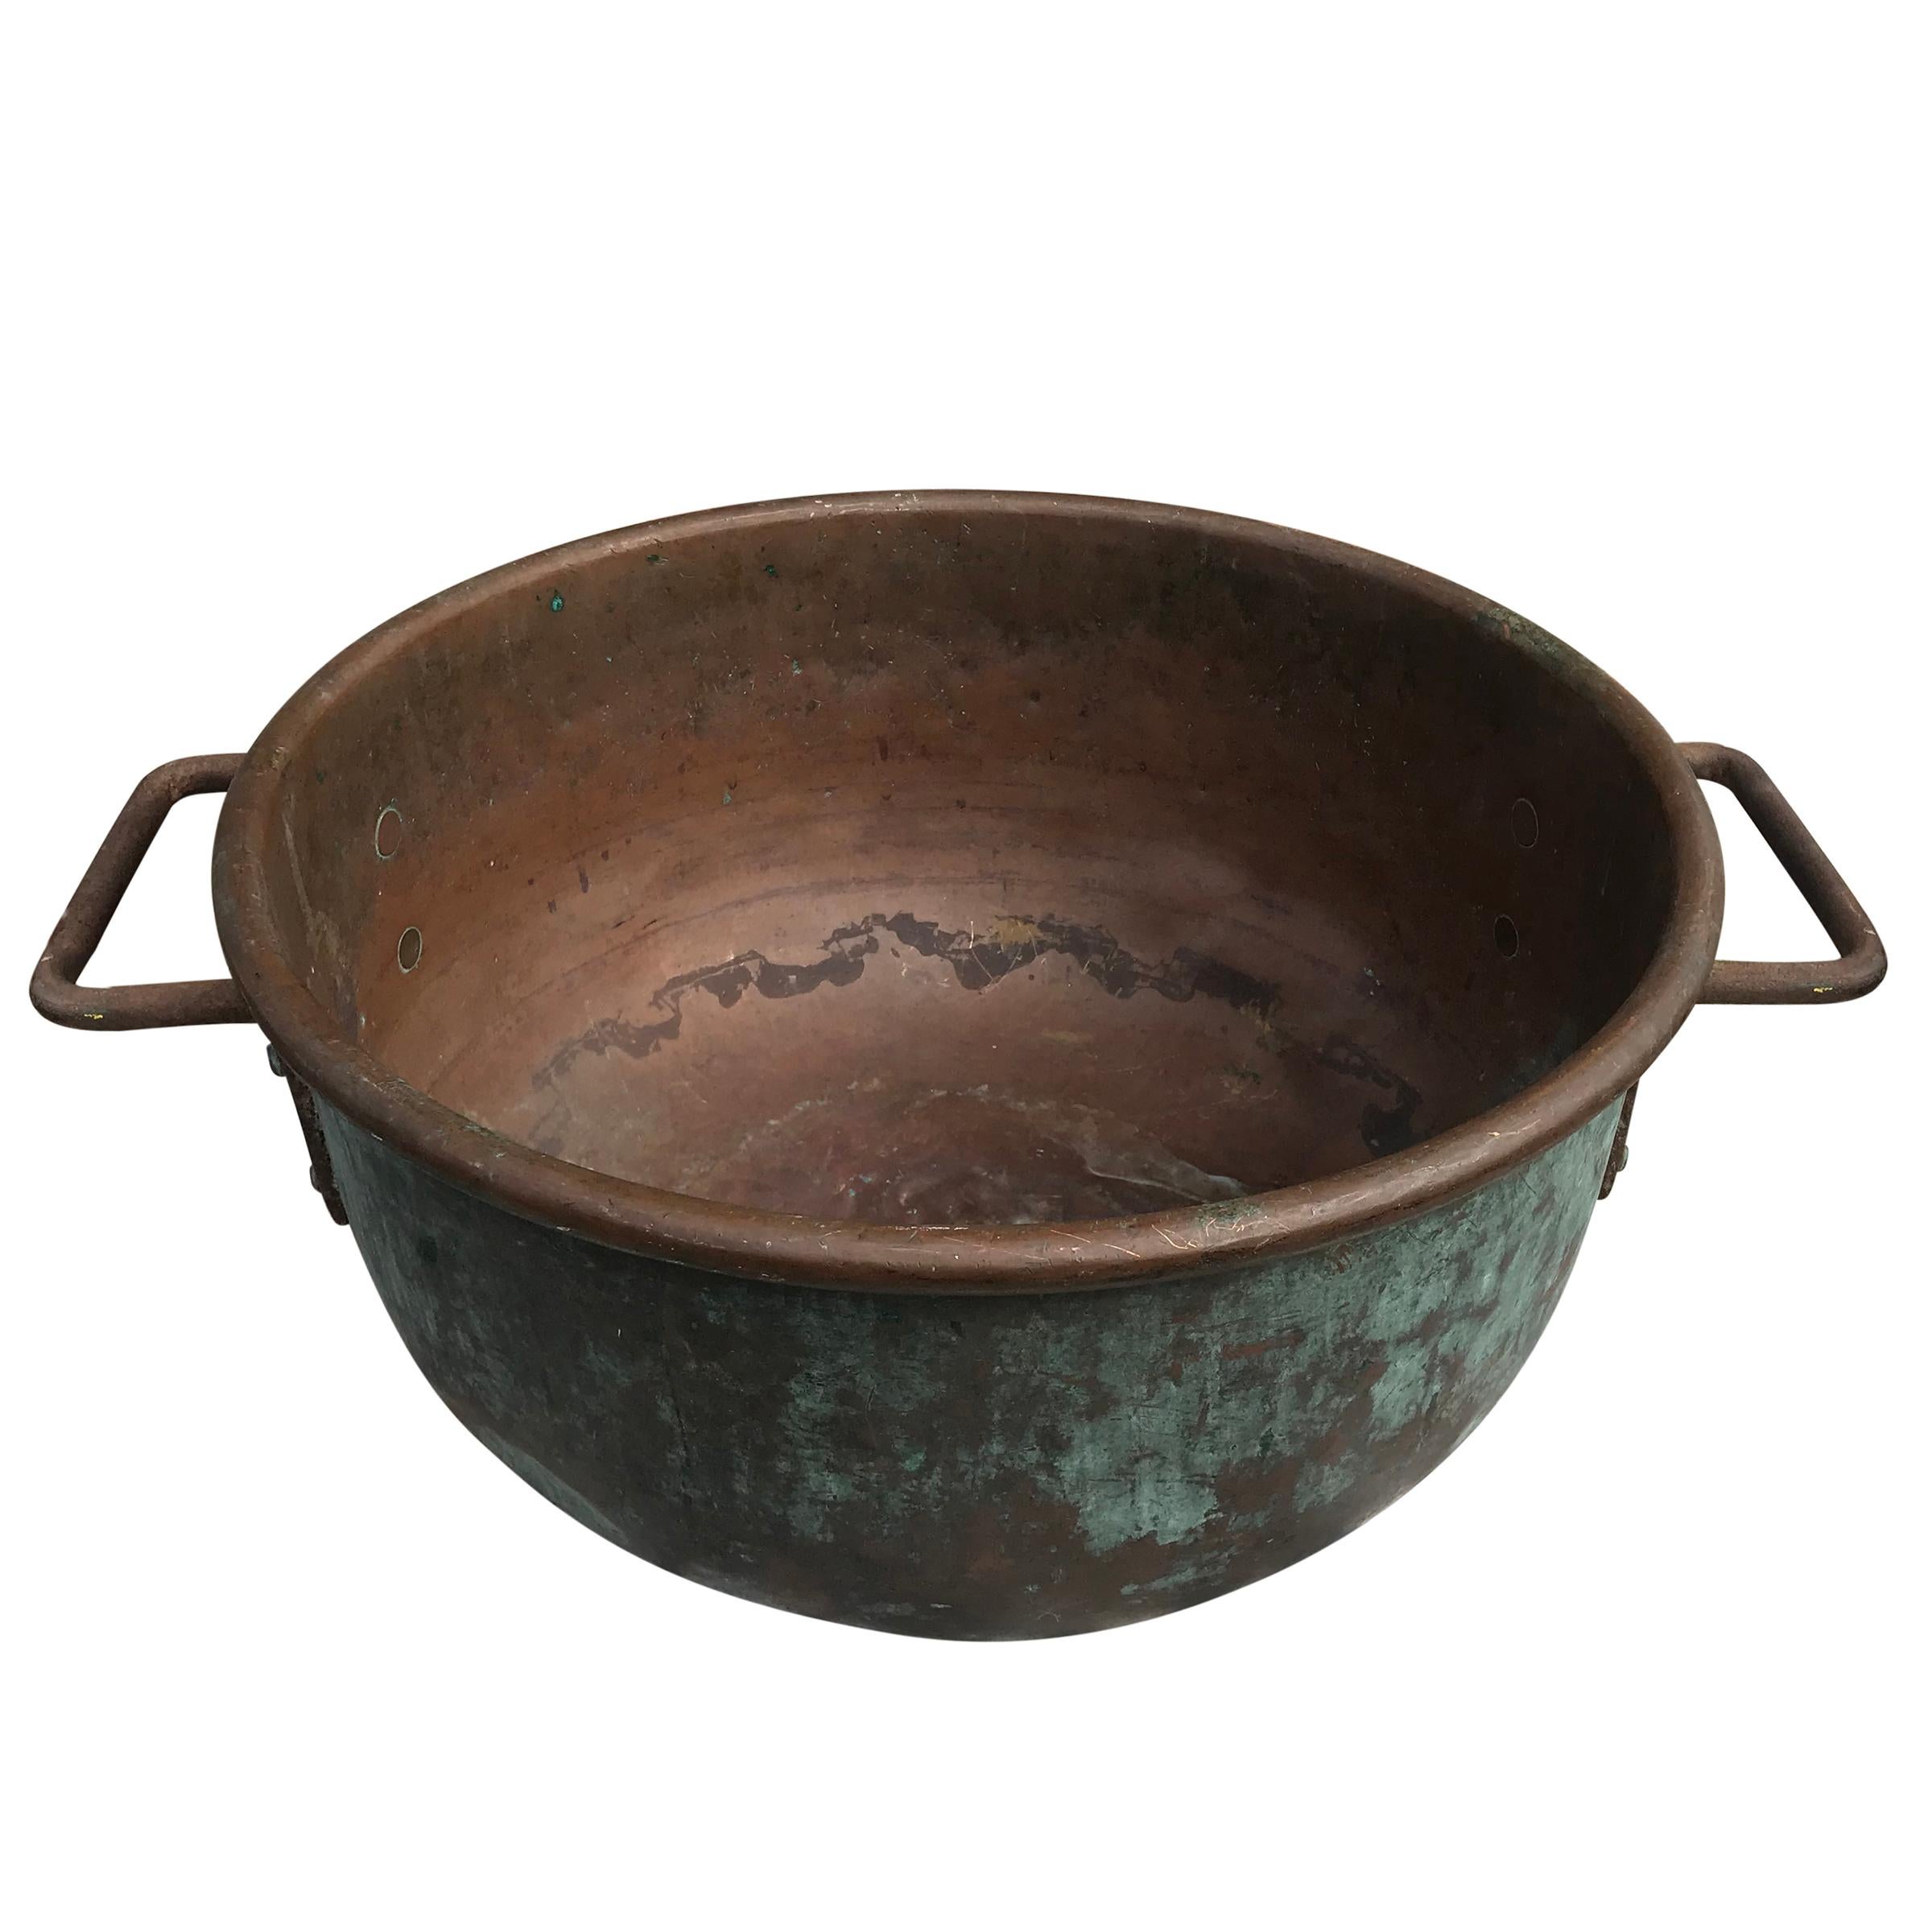 A wonderfully patinated early 20th century American hammered copper confectioner's pot used in the candy and chocolate making process, with iron handles attached with hammered copper rivets, and a lovely patina only copper and time can bestow. There